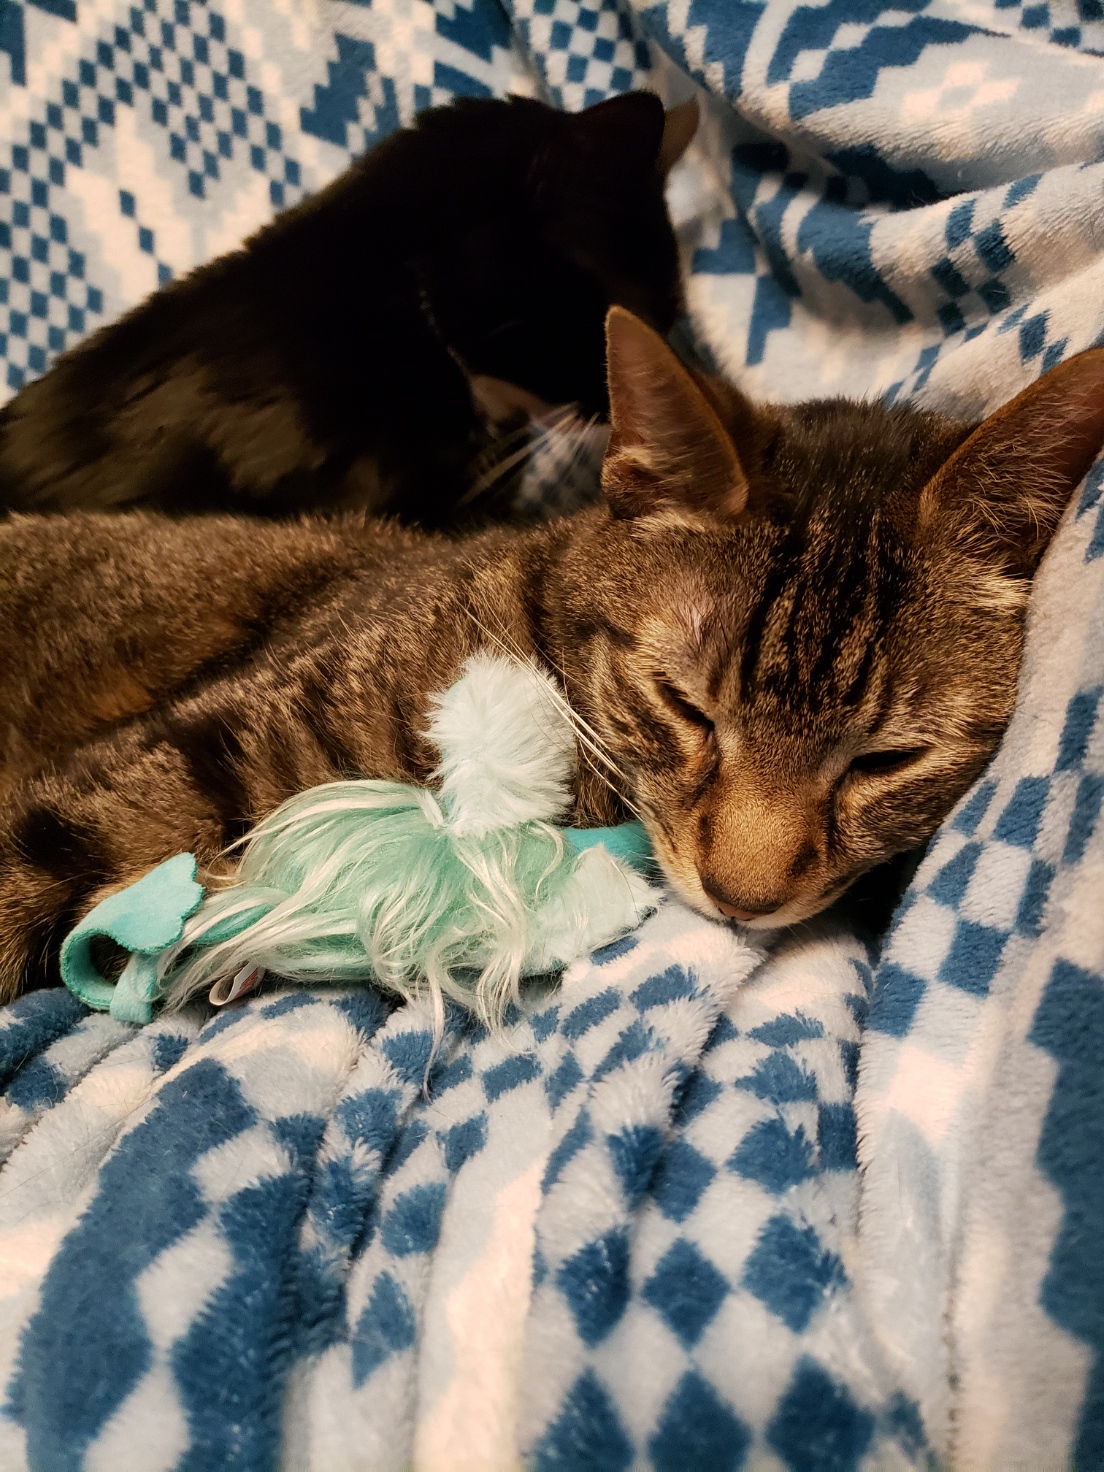 Firefly cuddling with his ostrich toy